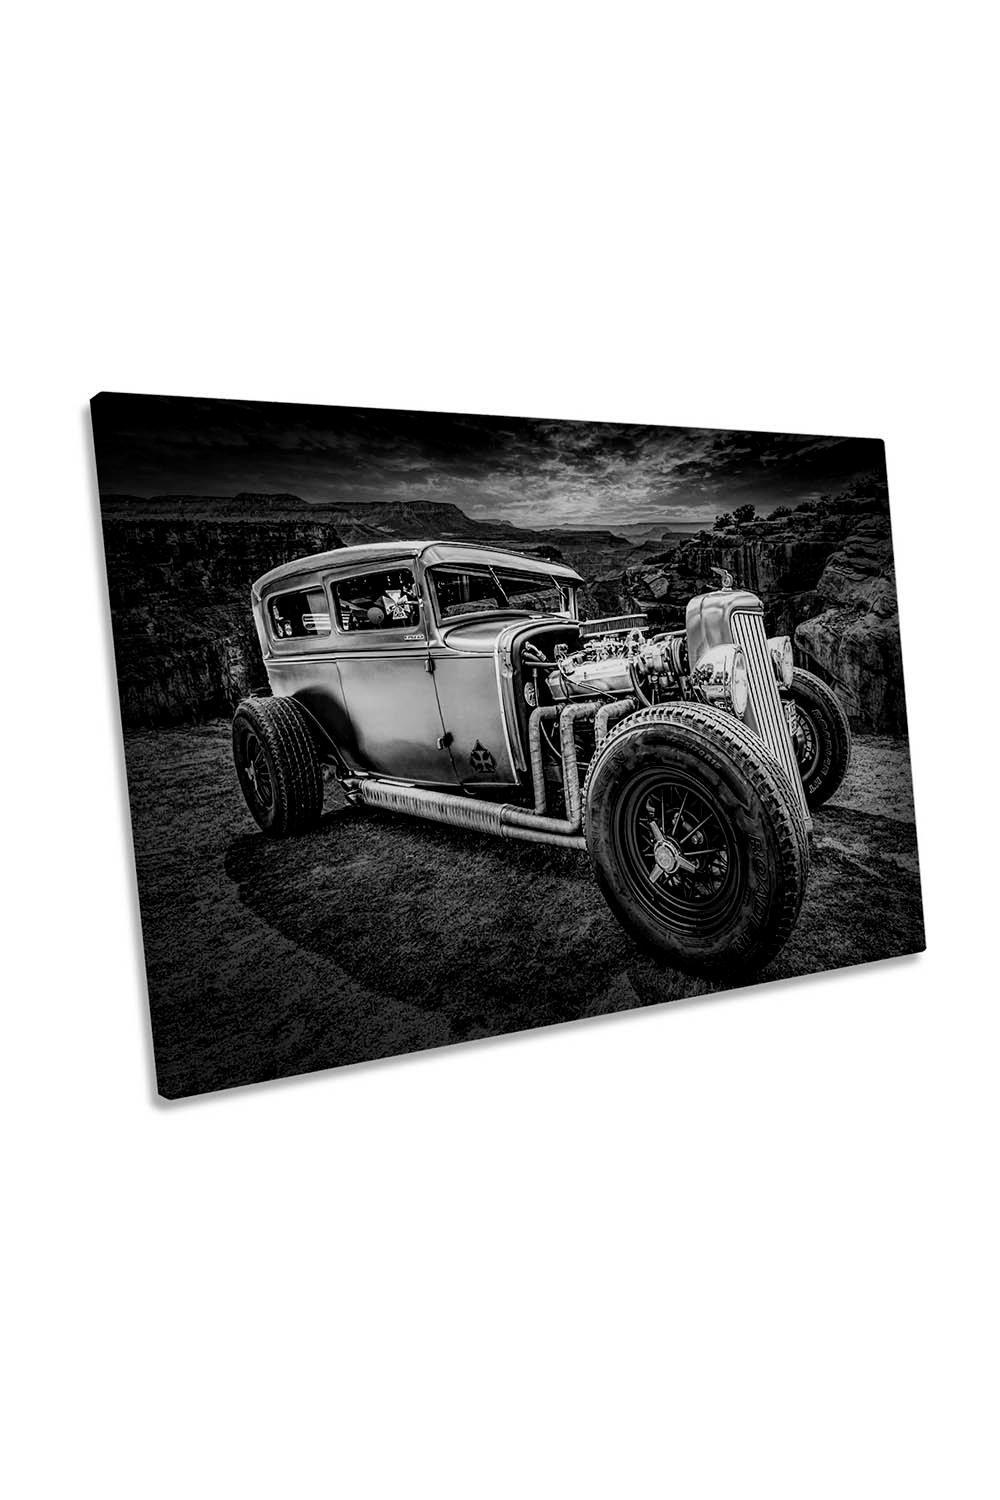 Hot Rod Classic Car Canvas Wall Art Picture Print